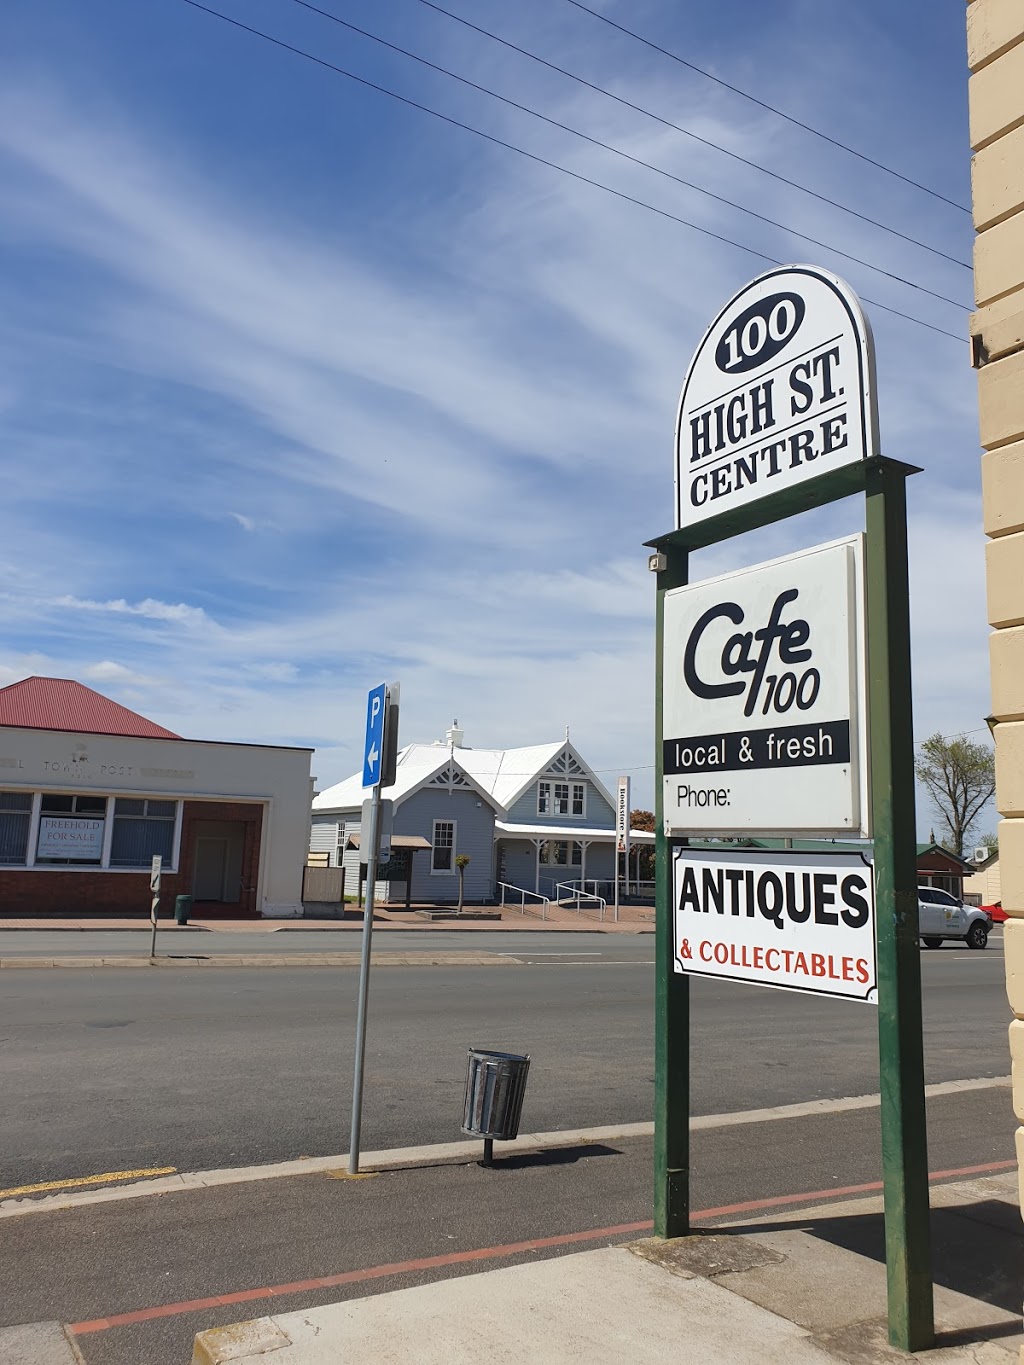 Wildes Antiques | home goods store | 100 High St, Campbell Town TAS 7210, Australia | 0363812001 OR +61 3 6381 2001